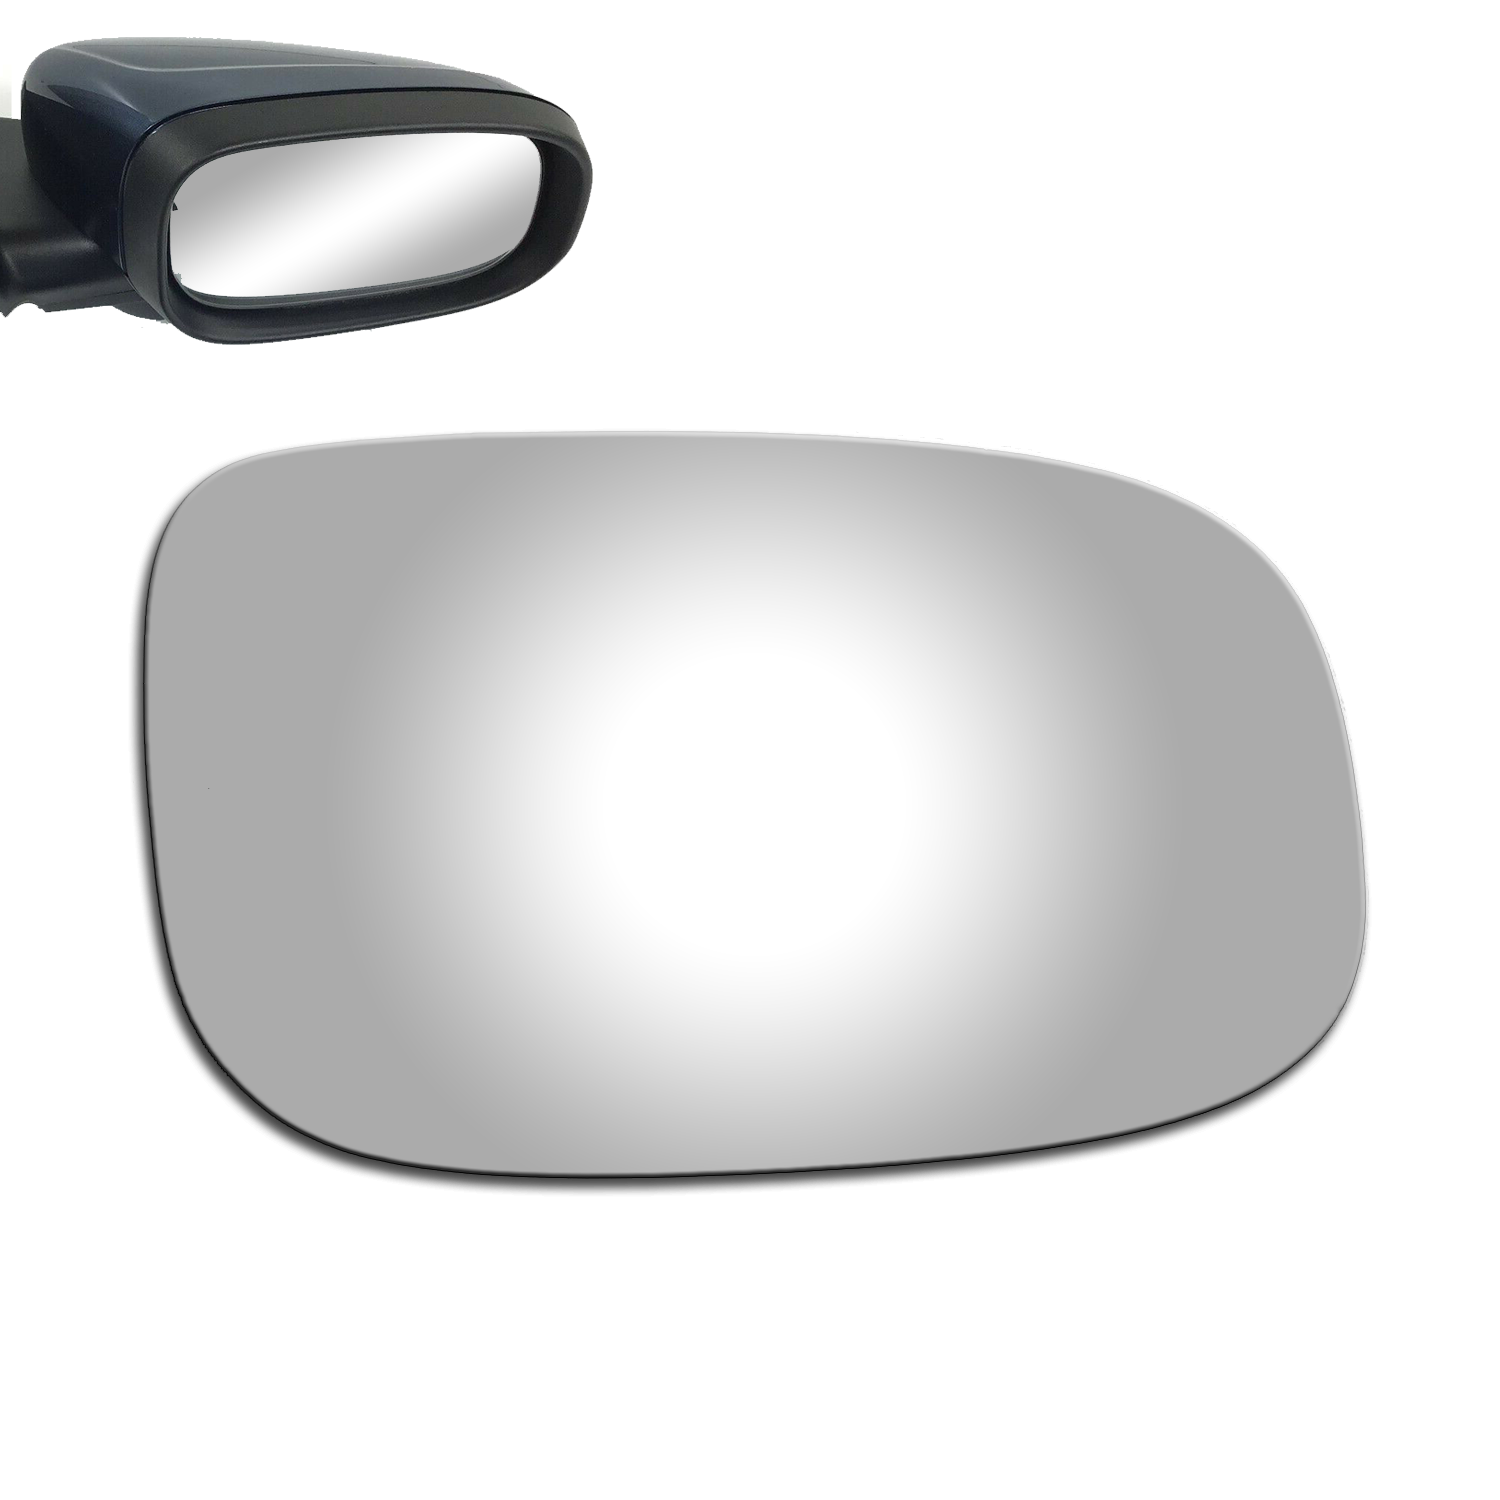 WLLW Replacement Mirror Glass for 2007-2014 Volvo C30/C70/S40/S60/S80/V50/V70, Driver Left Side LH/Passenger Right Side RH/The Both Sides Flat Convex M-0082